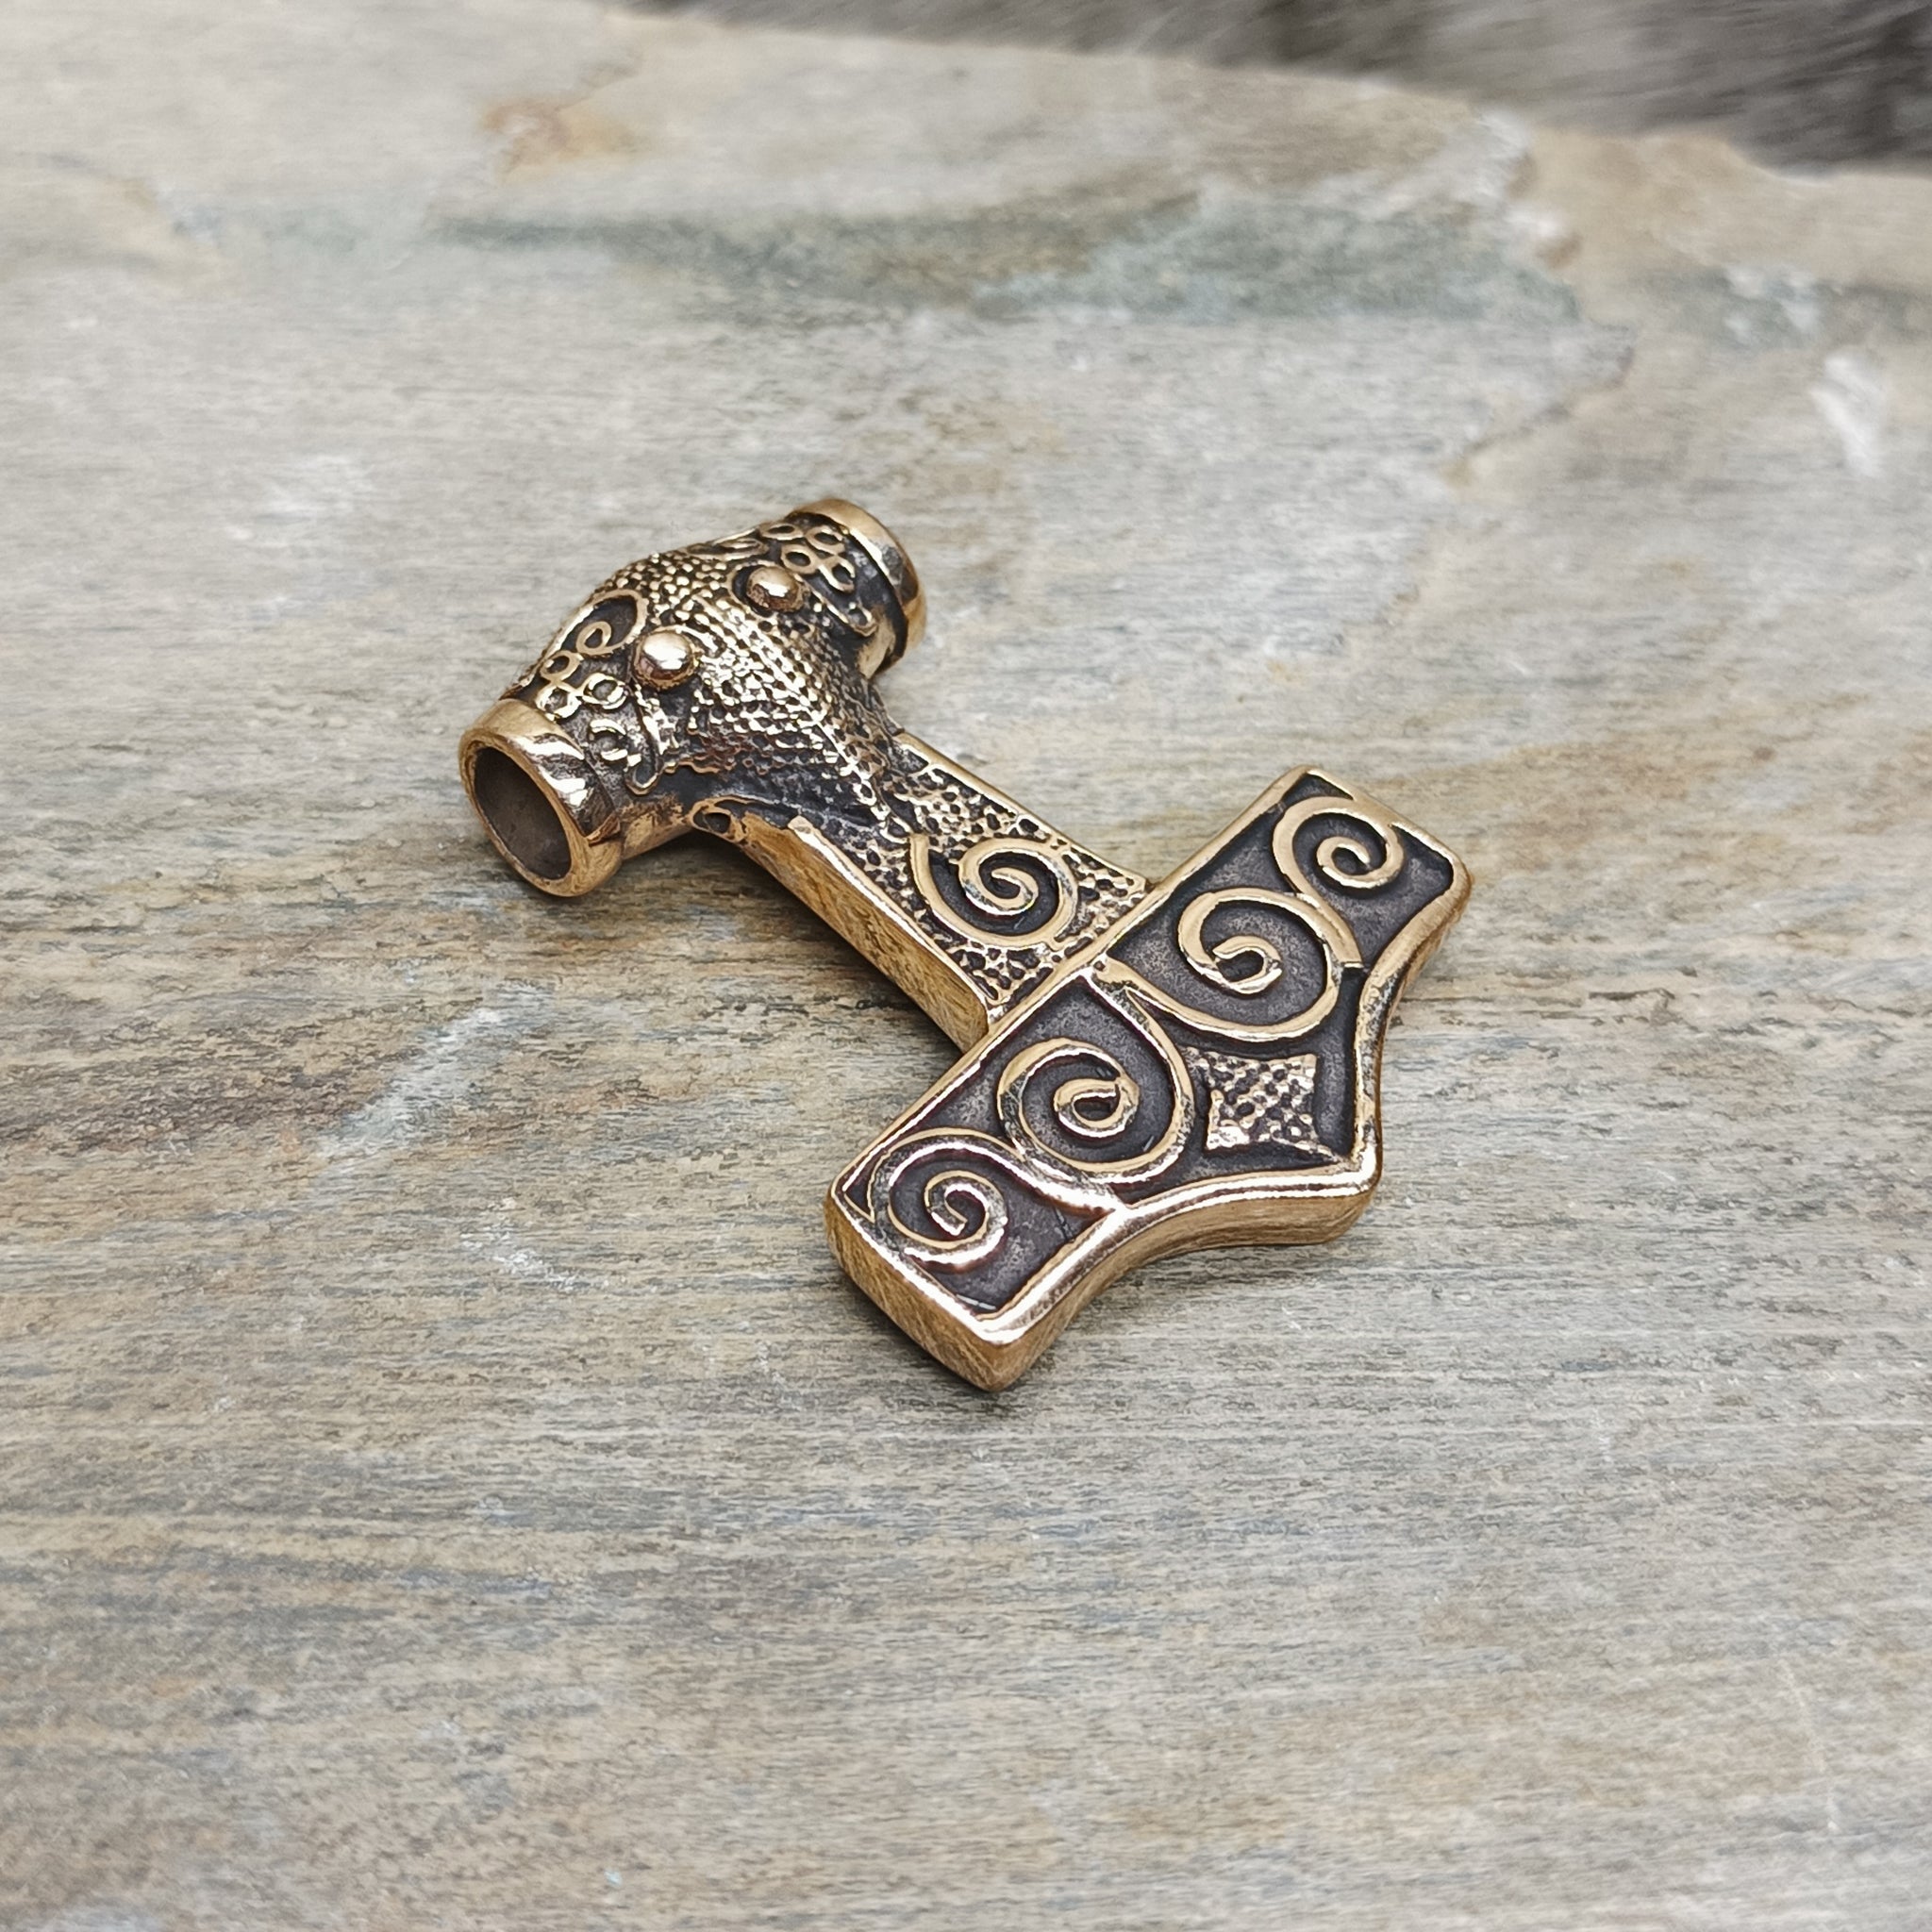 Bronze Filigree Thors Hammer Pendant From Kabara on Rock - Front Angle View